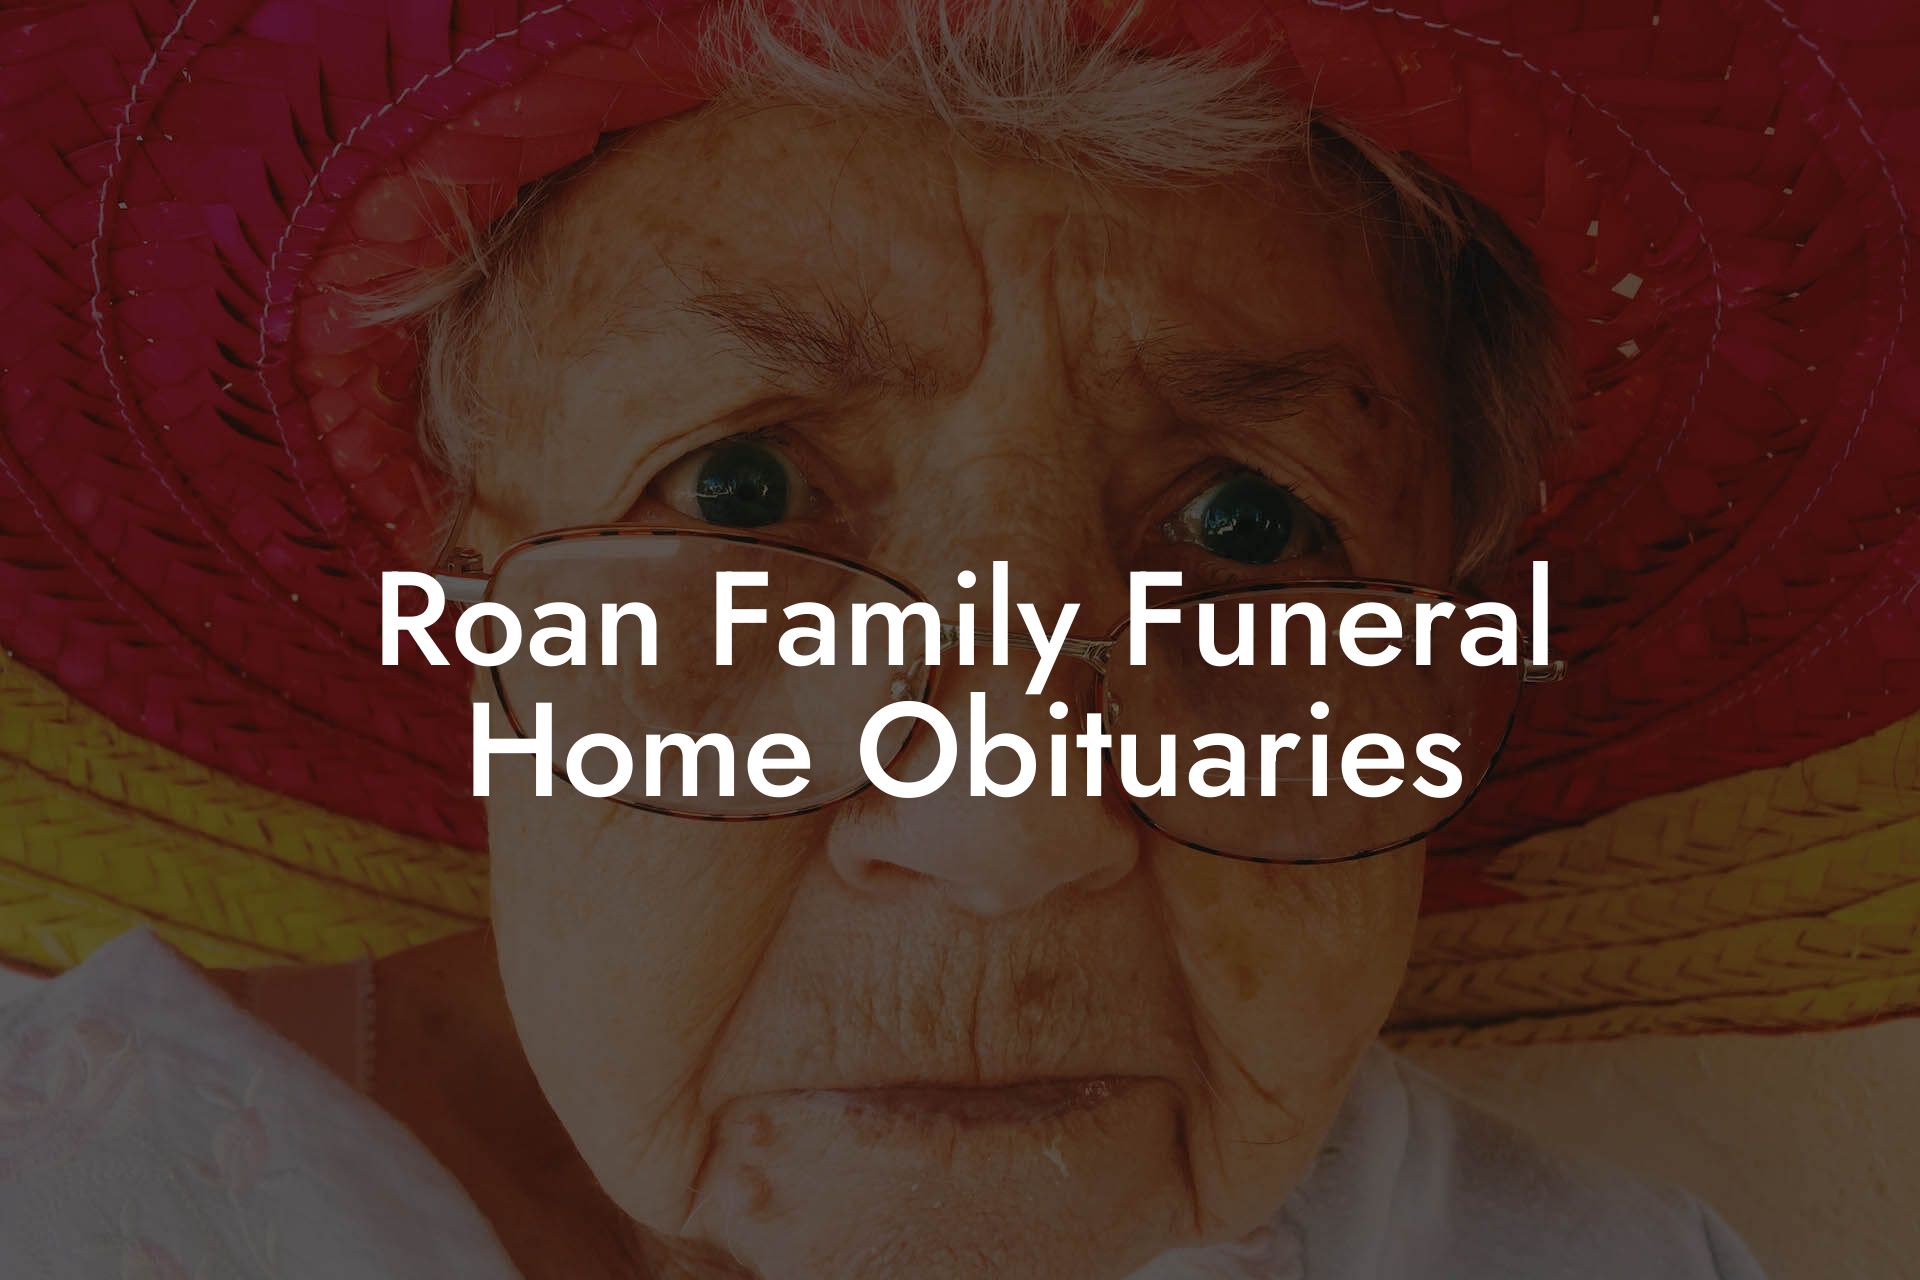 Roan Family Funeral Home Obituaries